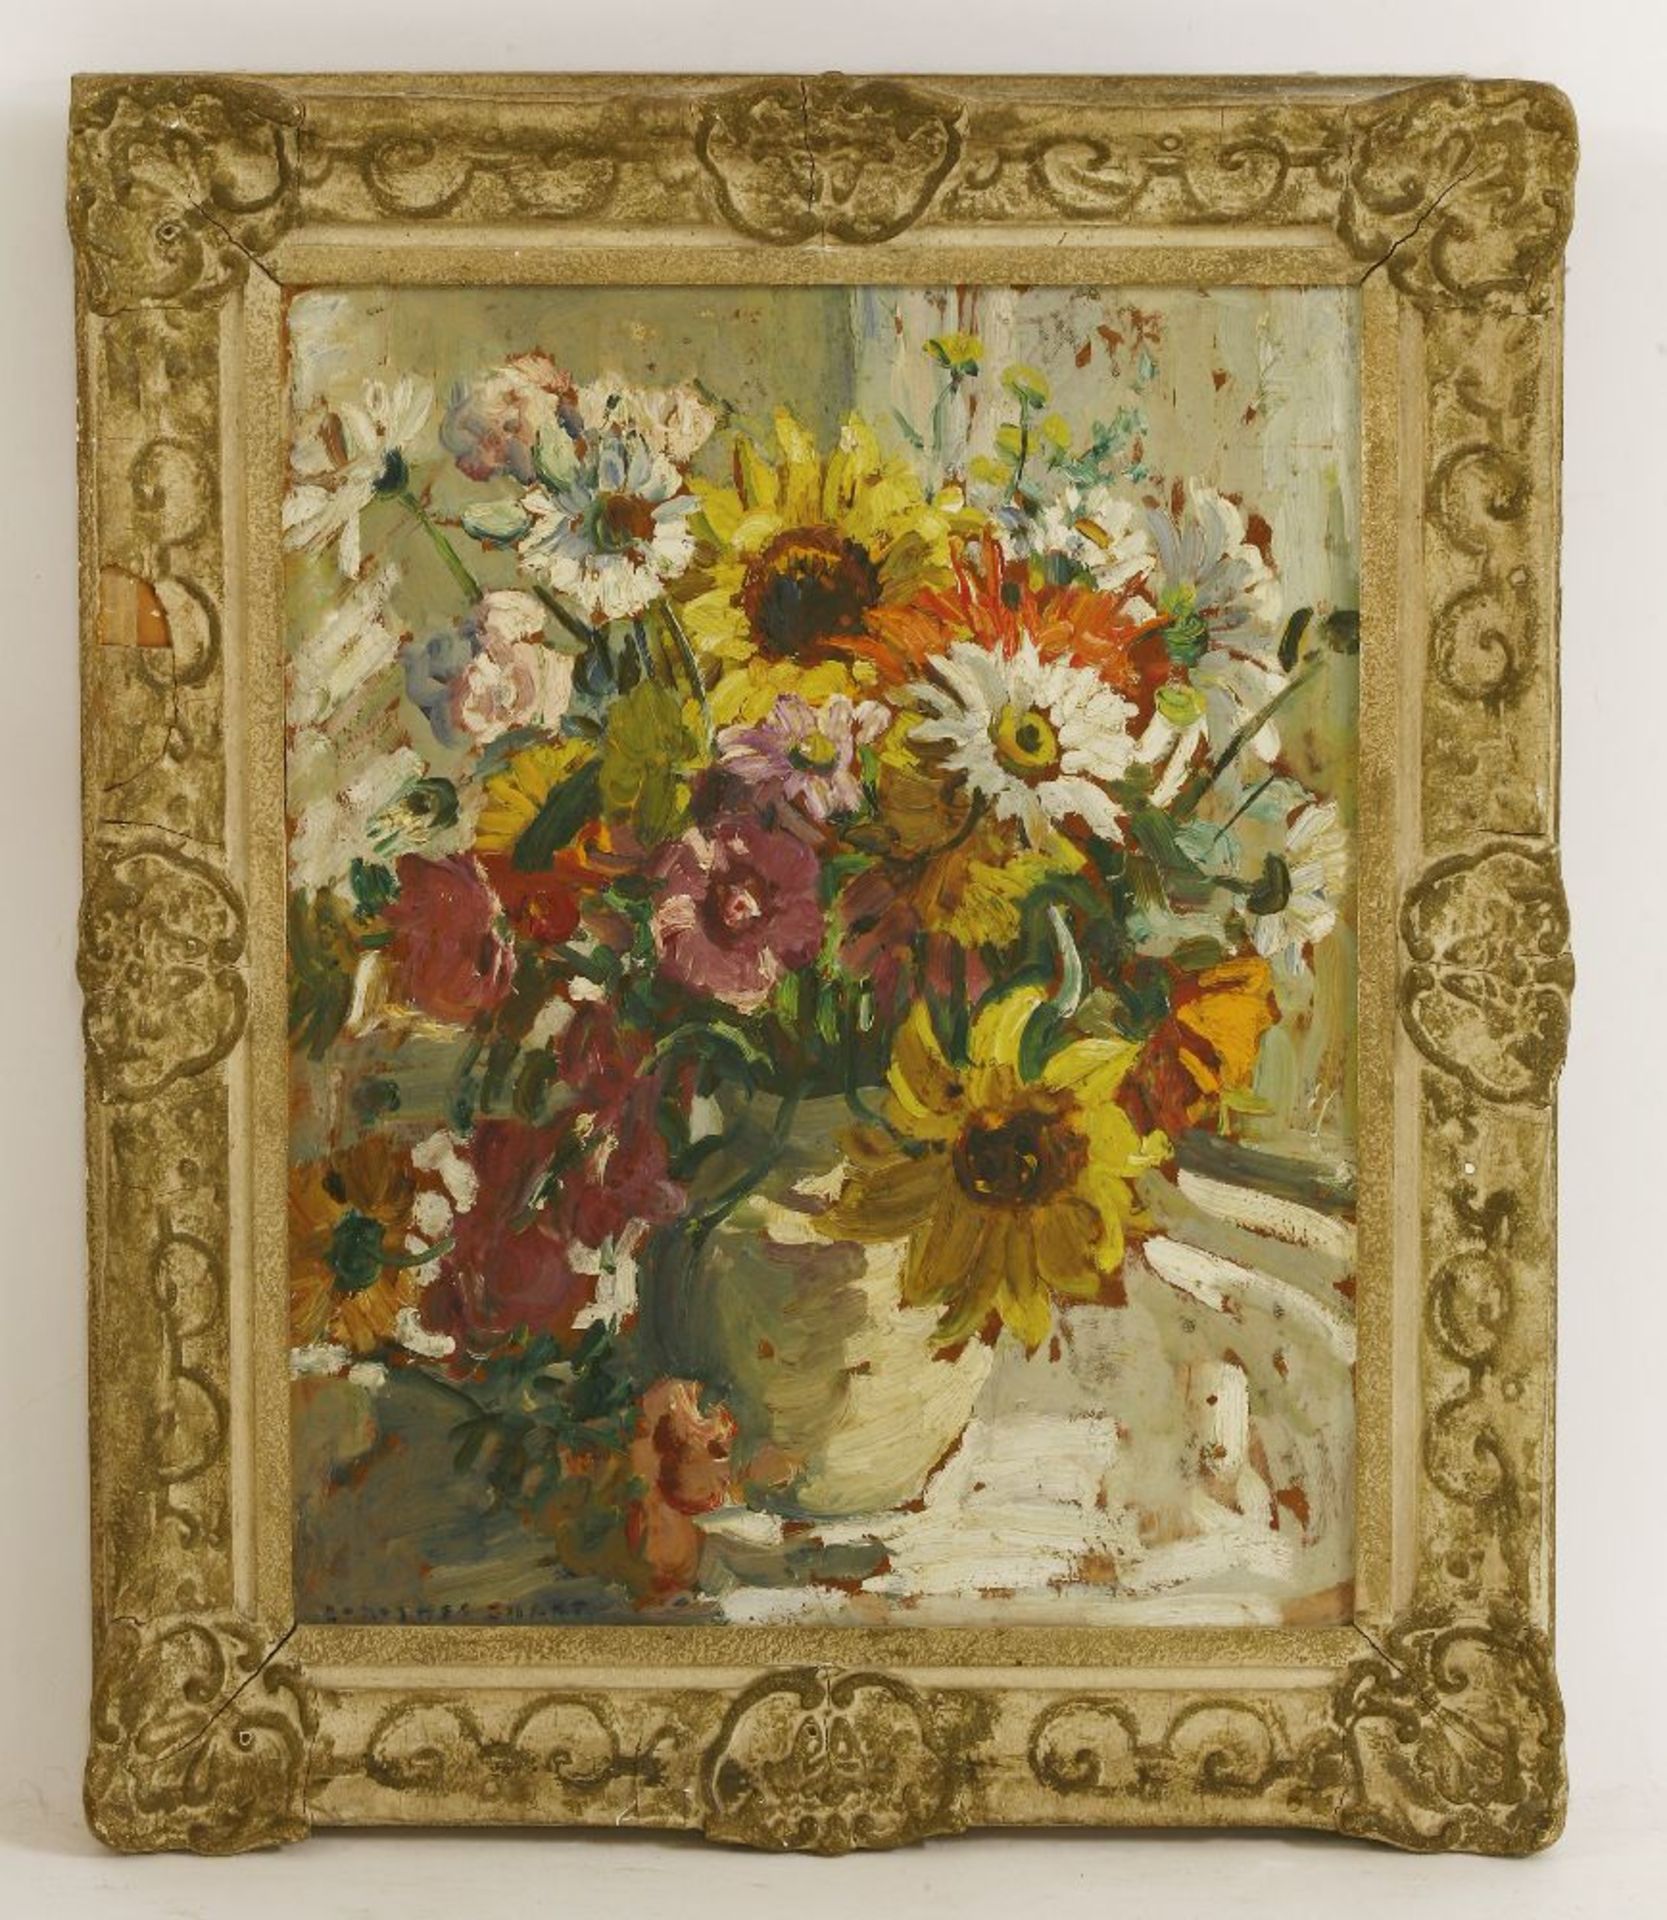 *Dorothea Sharp (1874-1955)A STILL LIFE OF SUMMER FLOWERS IN A VASESigned l.l., oil on board51 x - Image 2 of 4